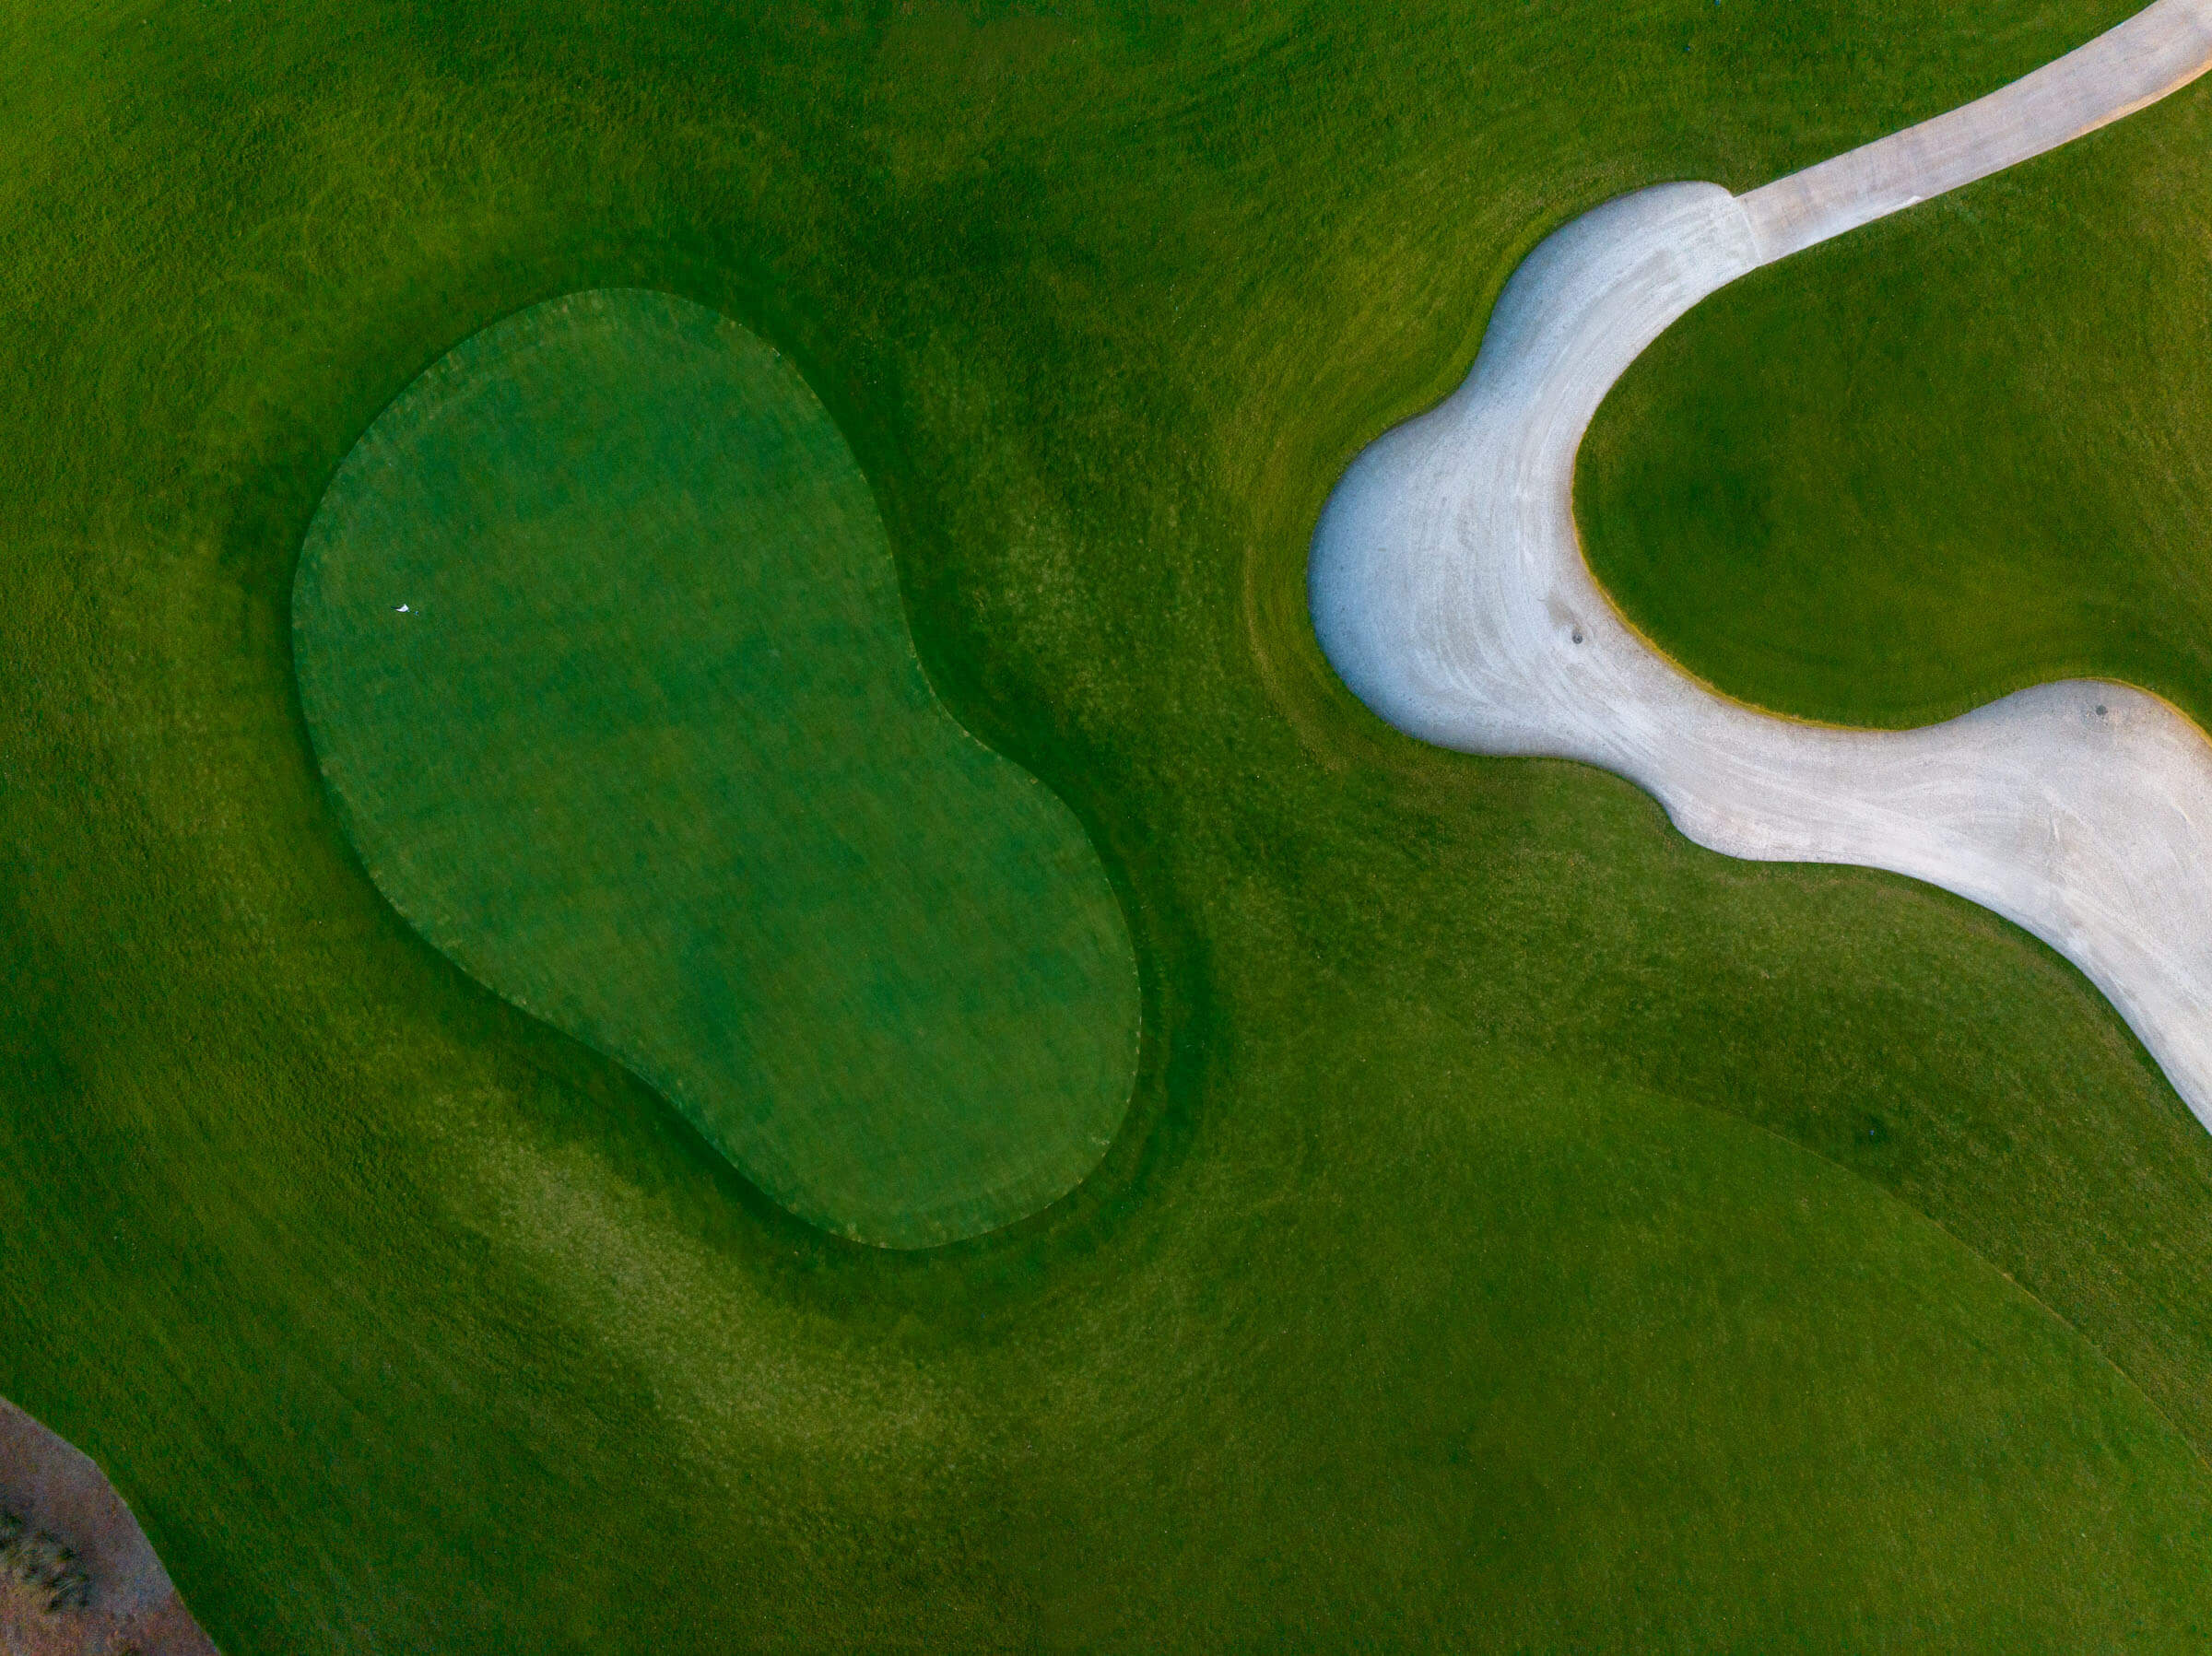 Aerial view of a golf course showing a green and a sand bunker surrounded by a winding path.